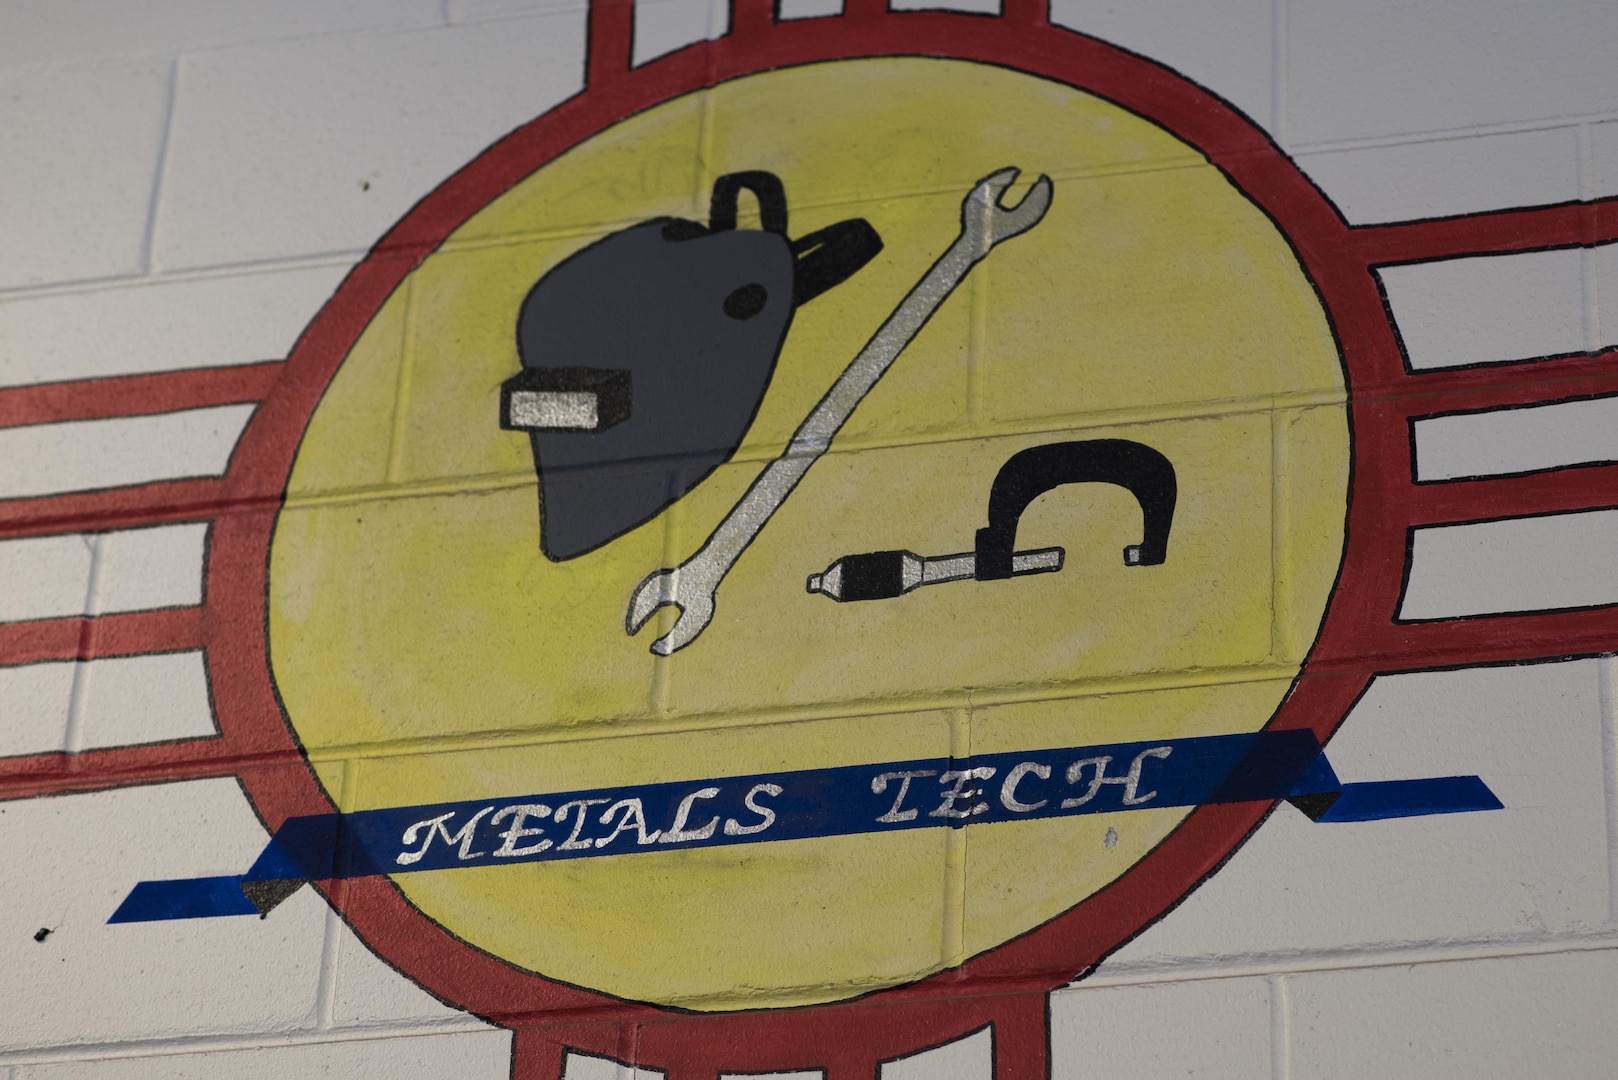 A metals tech logo is painted on the wall of the 27th Maintenance Squadron Aircraft Metals Technology shop at Cannon Air Force Base, New Mexico, June 21, 2017. The metals tech shop can fix or fabricate any piece of equipment for any of the aircraft platforms on base. (U.S. Air Force photo by Staff Sgt. Michael Washburn/Released)